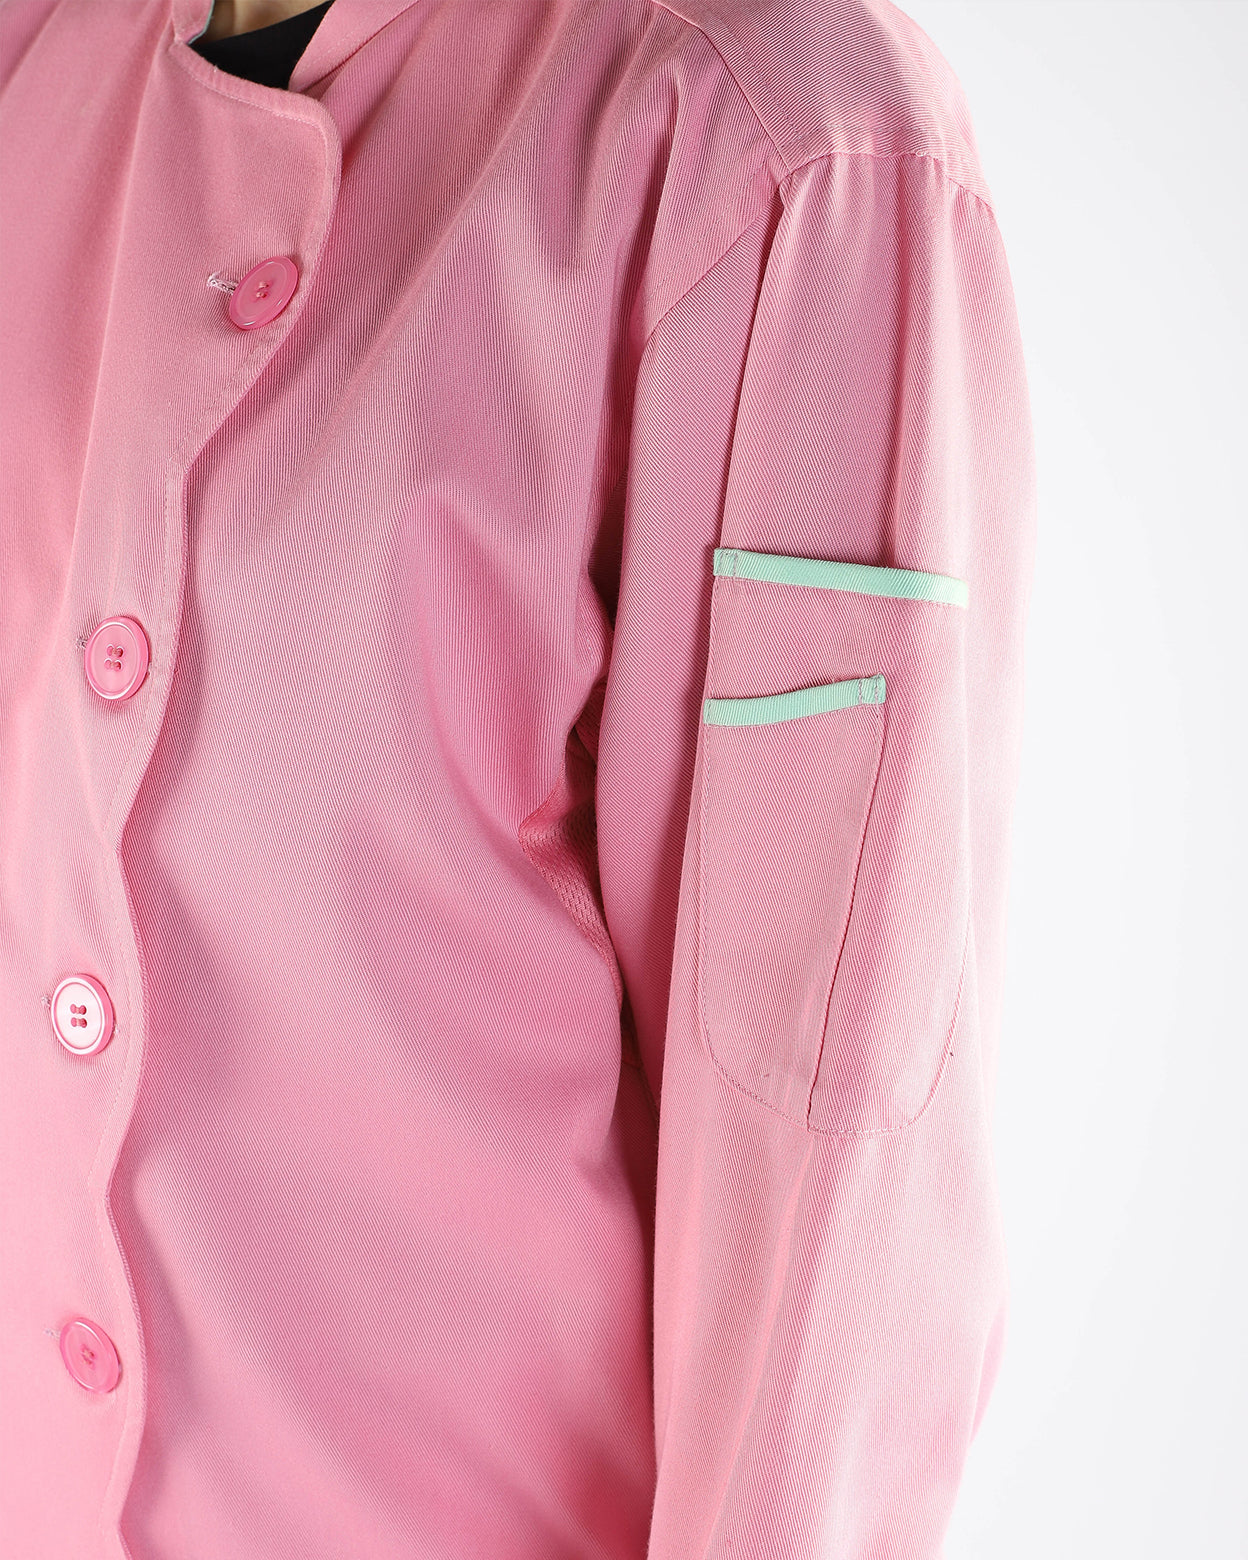 Pink Chef Jacket with Scalloped Front